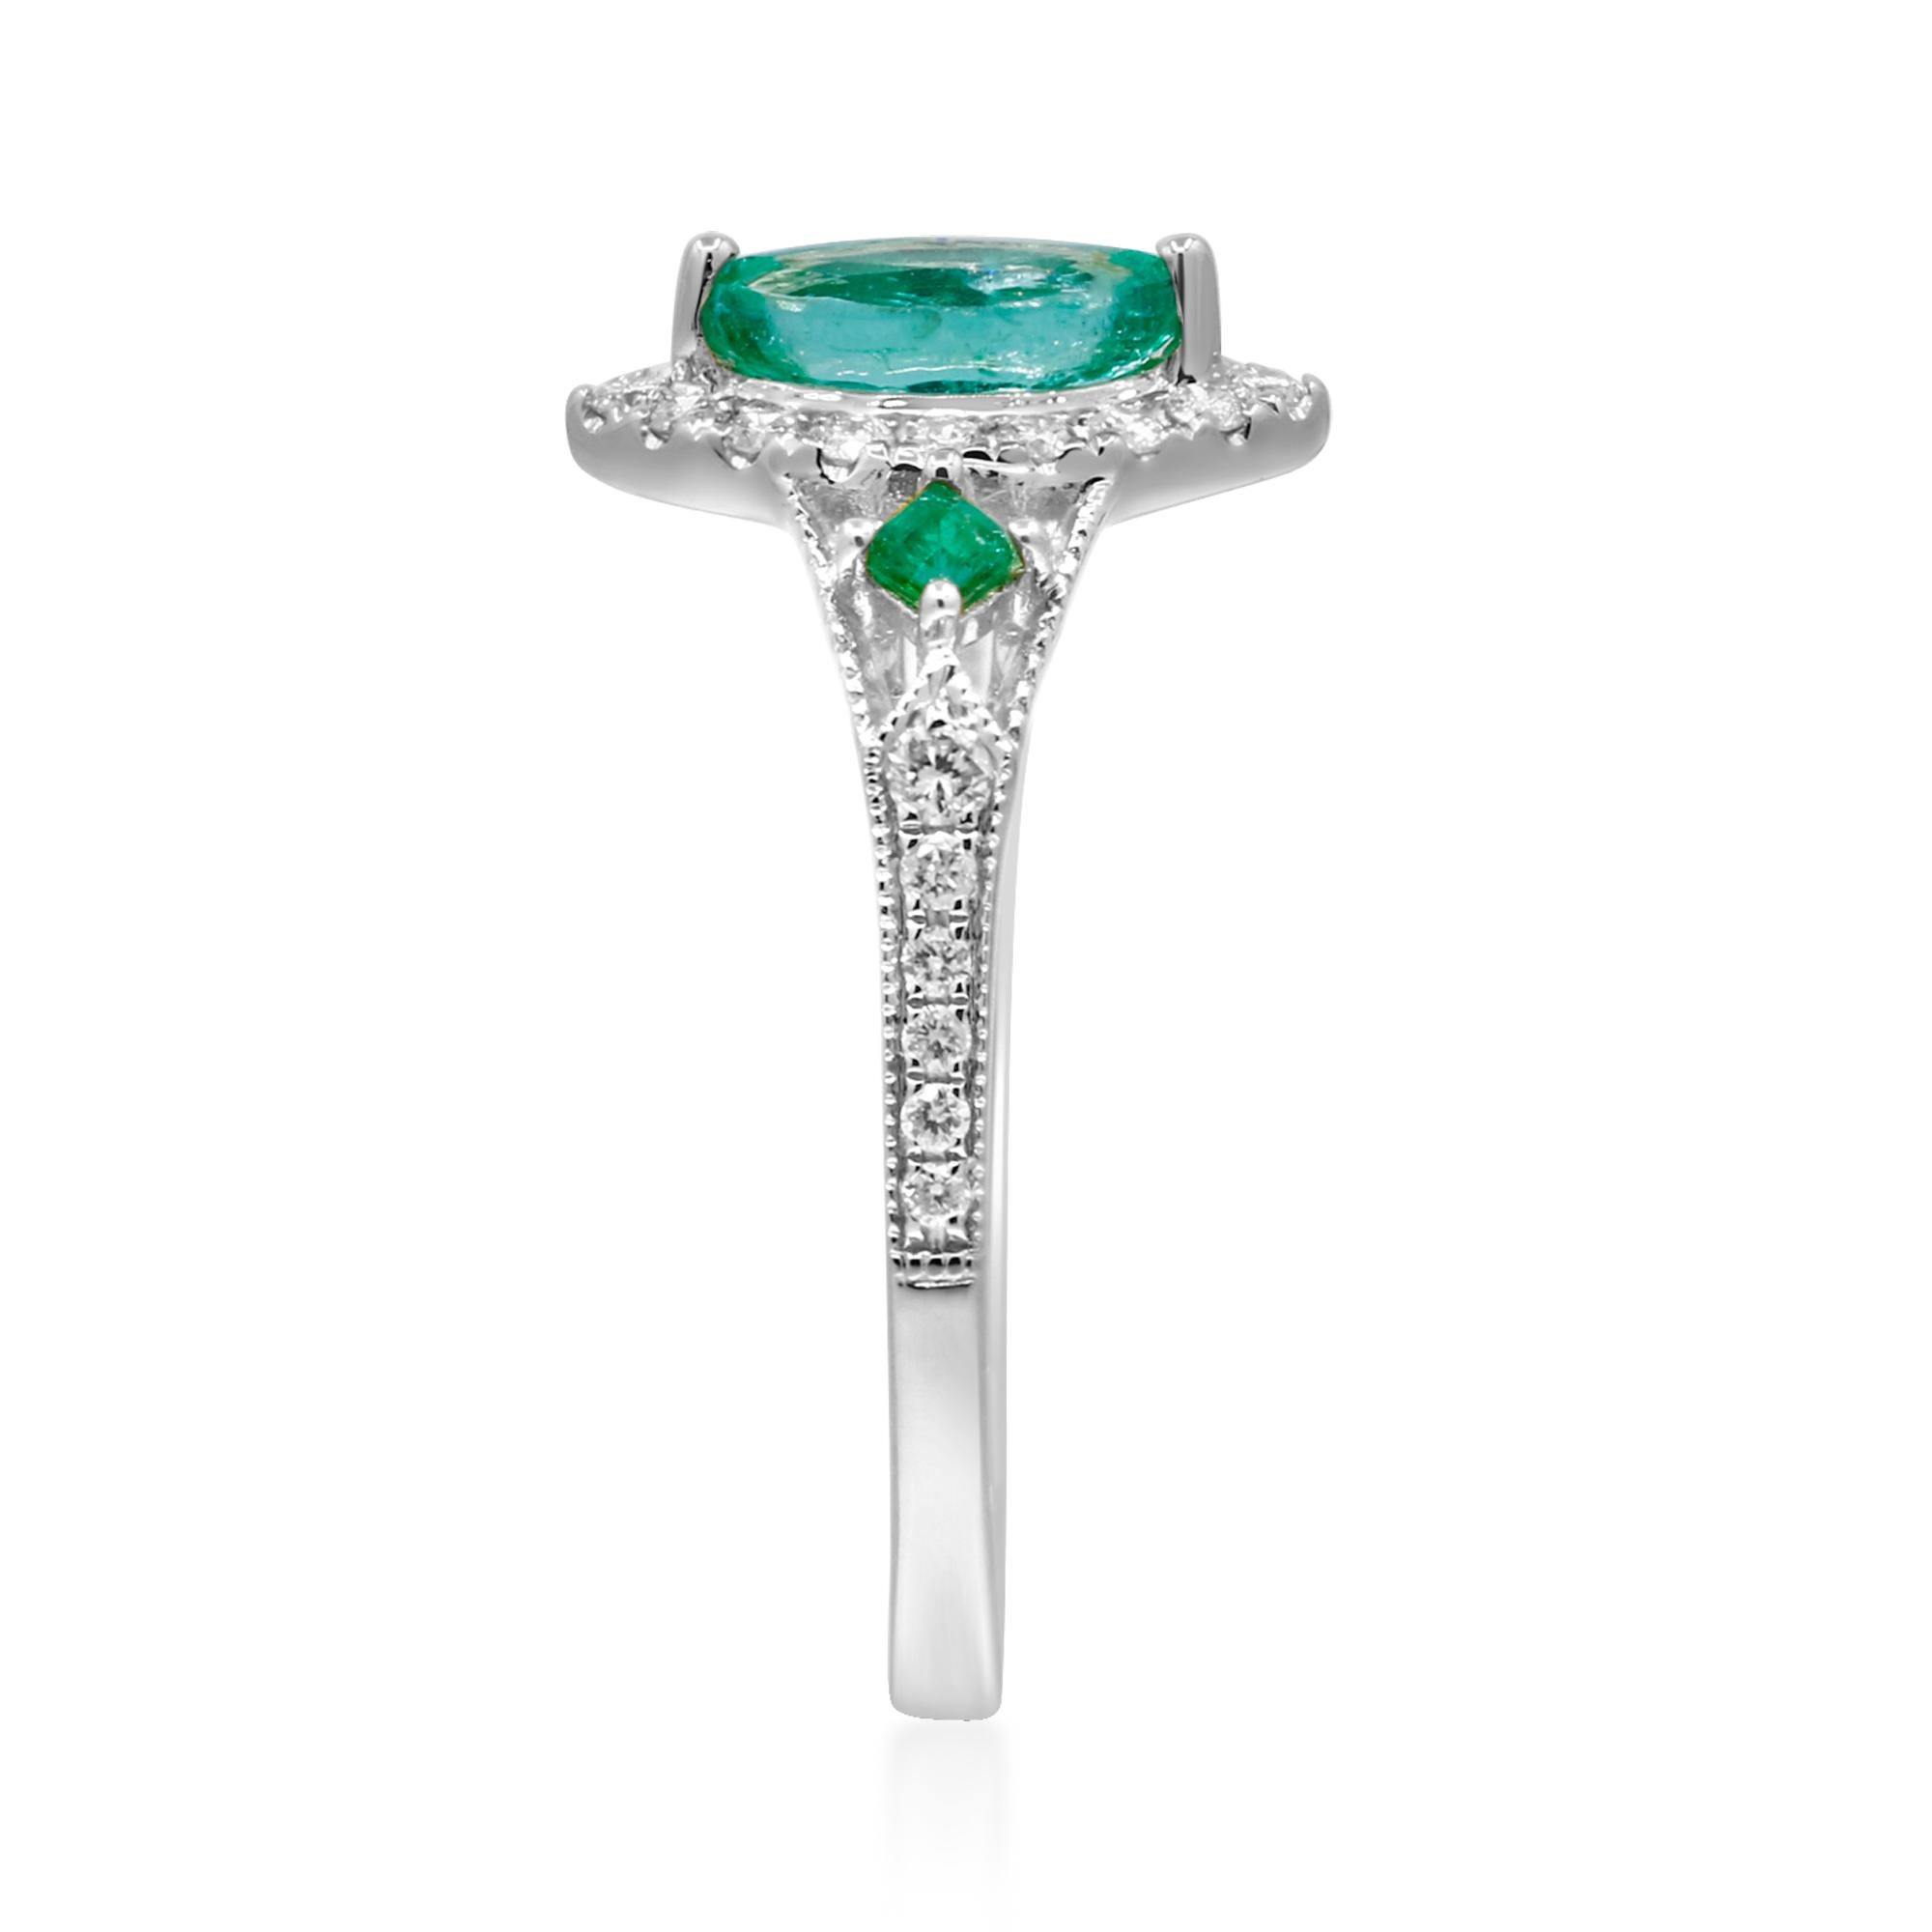 Decorate yourself in elegance with this Ring is crafted from 14-karat Yellow Gold by Gin & Grace. This Ring is made up of 8x4 mm Marquise-Cut Emerald (1 pcs) 0.51 carat, 2.0 mm Square-cut Emerald (2 pcs) 0.11 carat and Round-cut White Diamond (28